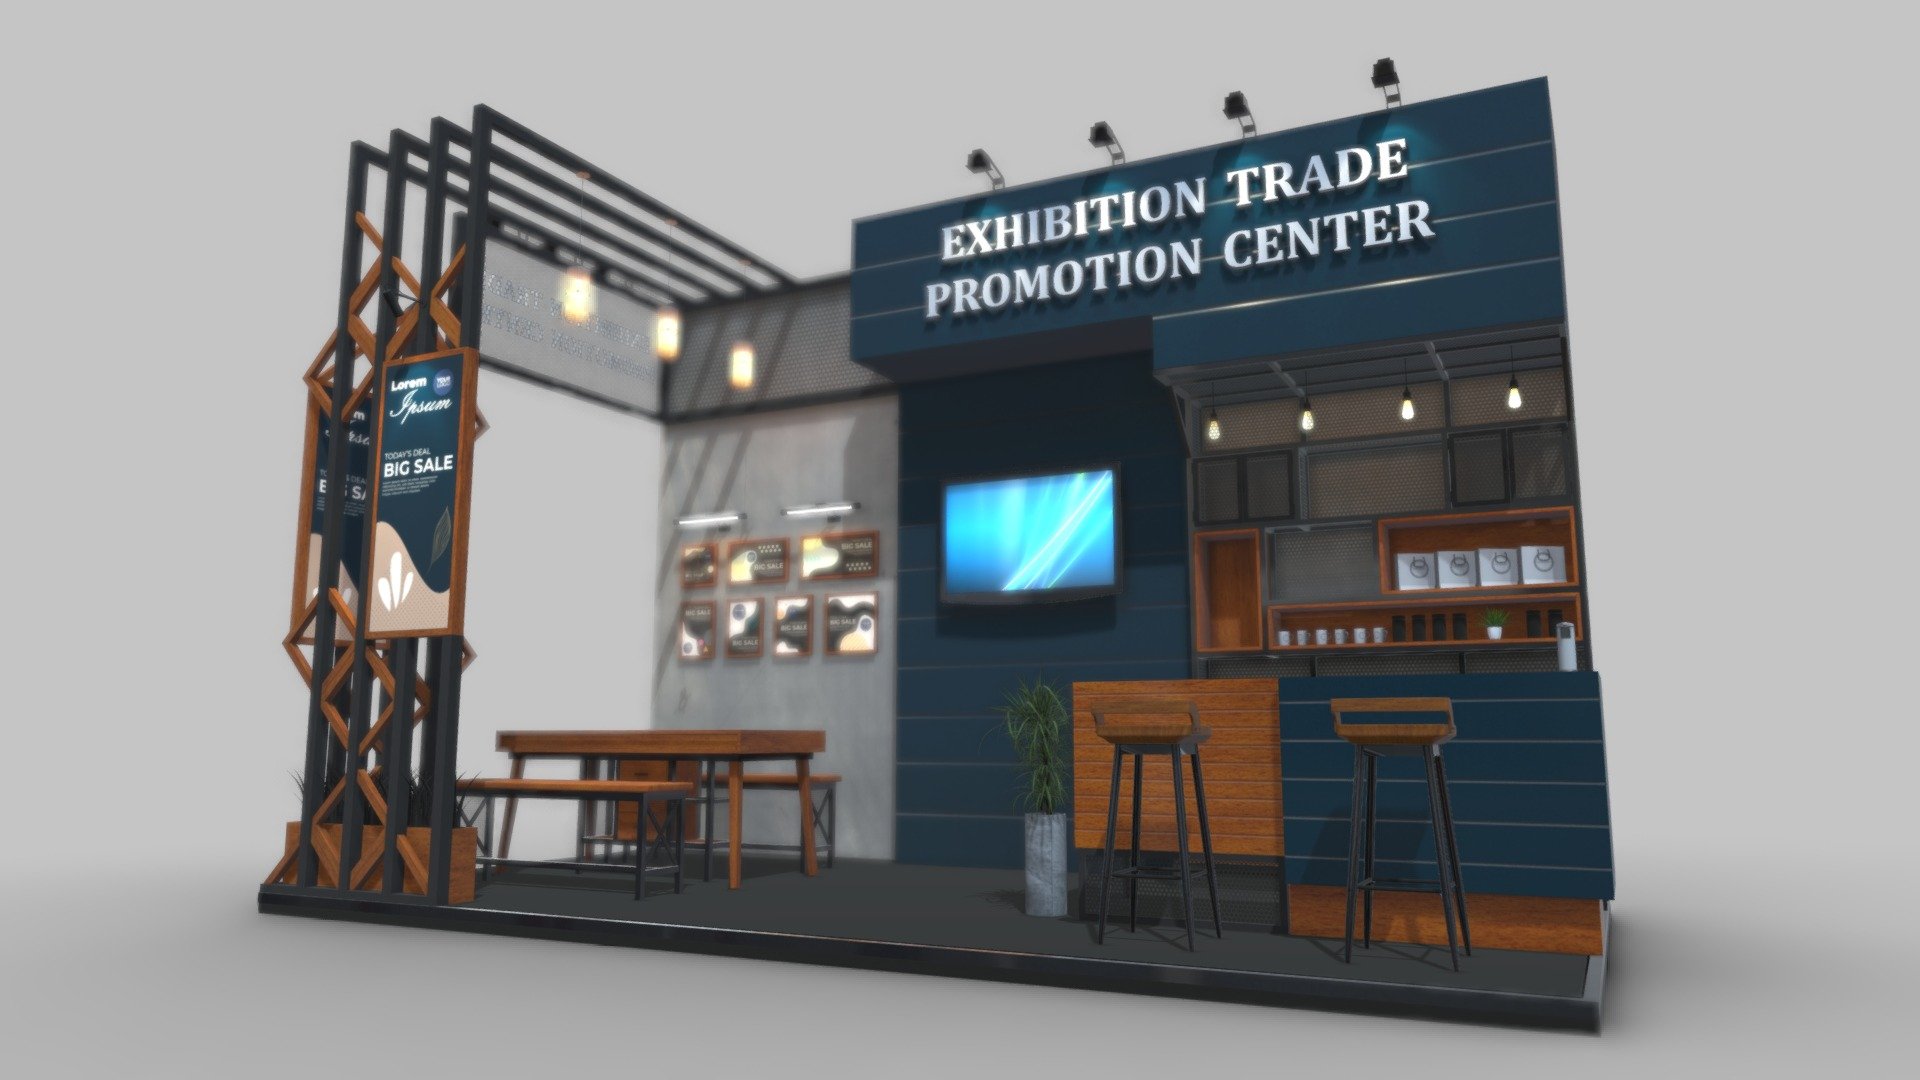 this is an Exhibition stand design

Built with Autodesk 3Ds max 2018 software - V ray 3.60.03 Renderer

Additional File:
1. Autodesk 3Ds max 2018 - V ray 3.60.03 Renderer
2. Autodesk 3Ds max 2018 - Default Scanline Renderer
3. OBJ standart map texture
4. OBJ V ray complete map texture
5. FBX

Full Render Preview:
https://www.behance.net/gallery/101718635/DOWNLOAD-EXHIBITOIN-STAND-DESIGN-KMN - EXHIBITION STAND KMN 6x3m - Buy Royalty Free 3D model by fasih.lisan 3d model